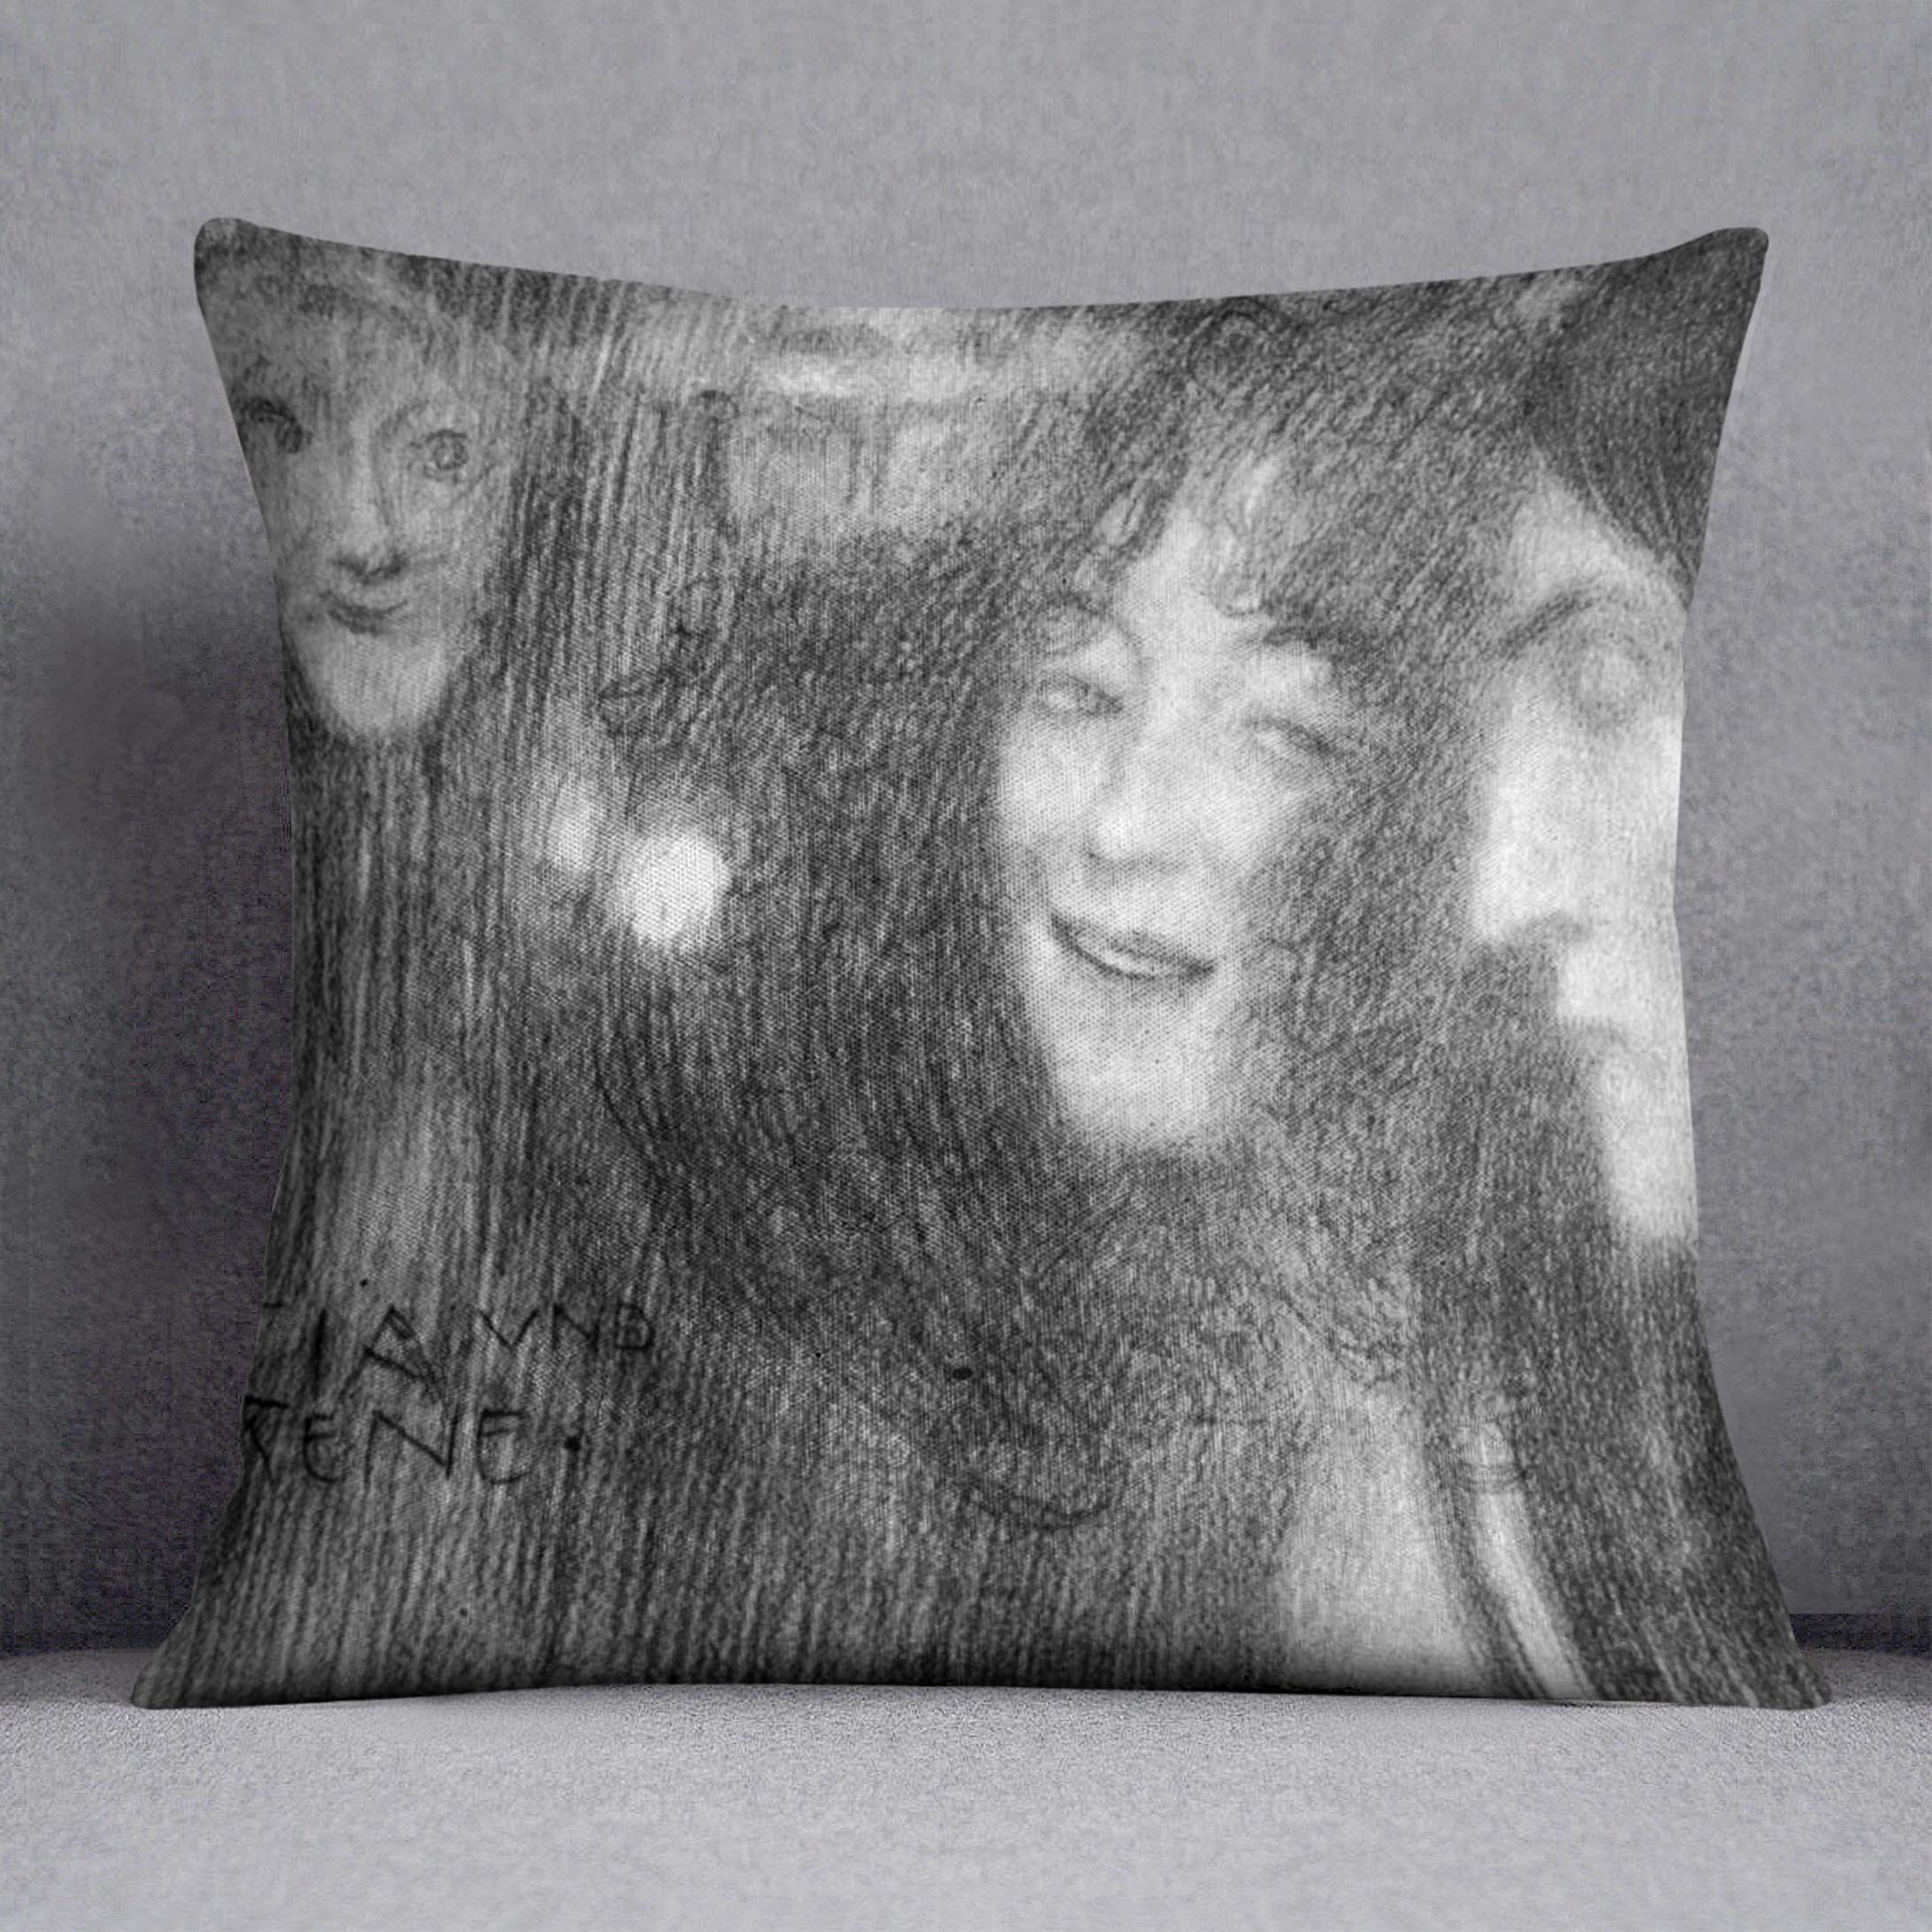 Two girls heads in profile and masks Thalia and Melpomene by Klimt Cushion